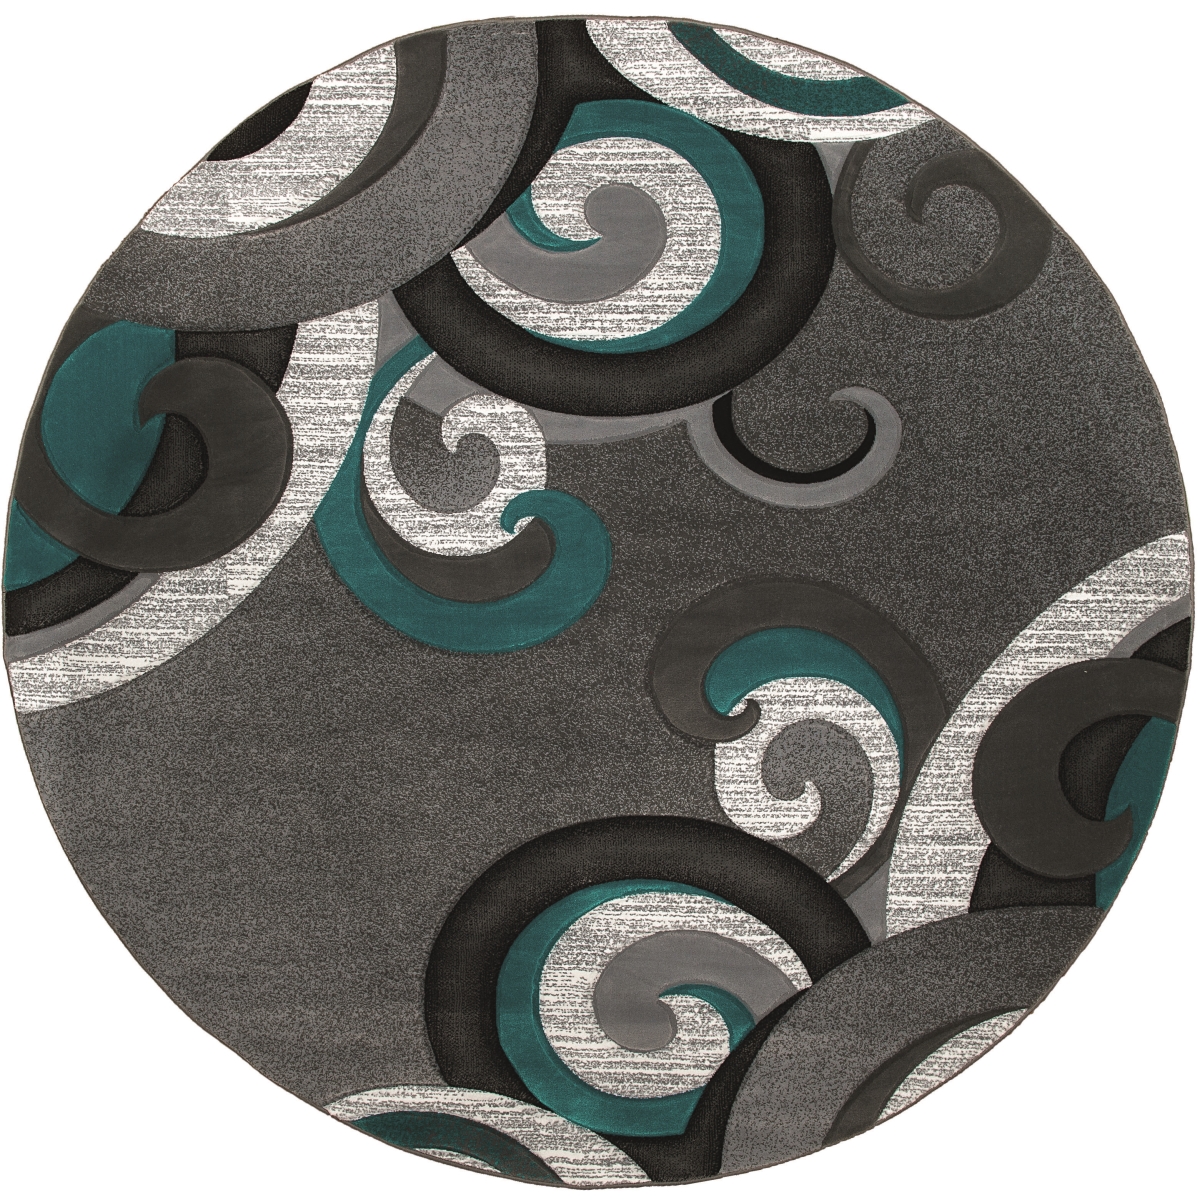 2050 11369 88r 7 Ft. 10 In. Bristol Rhiannon Turquoise Round Rug